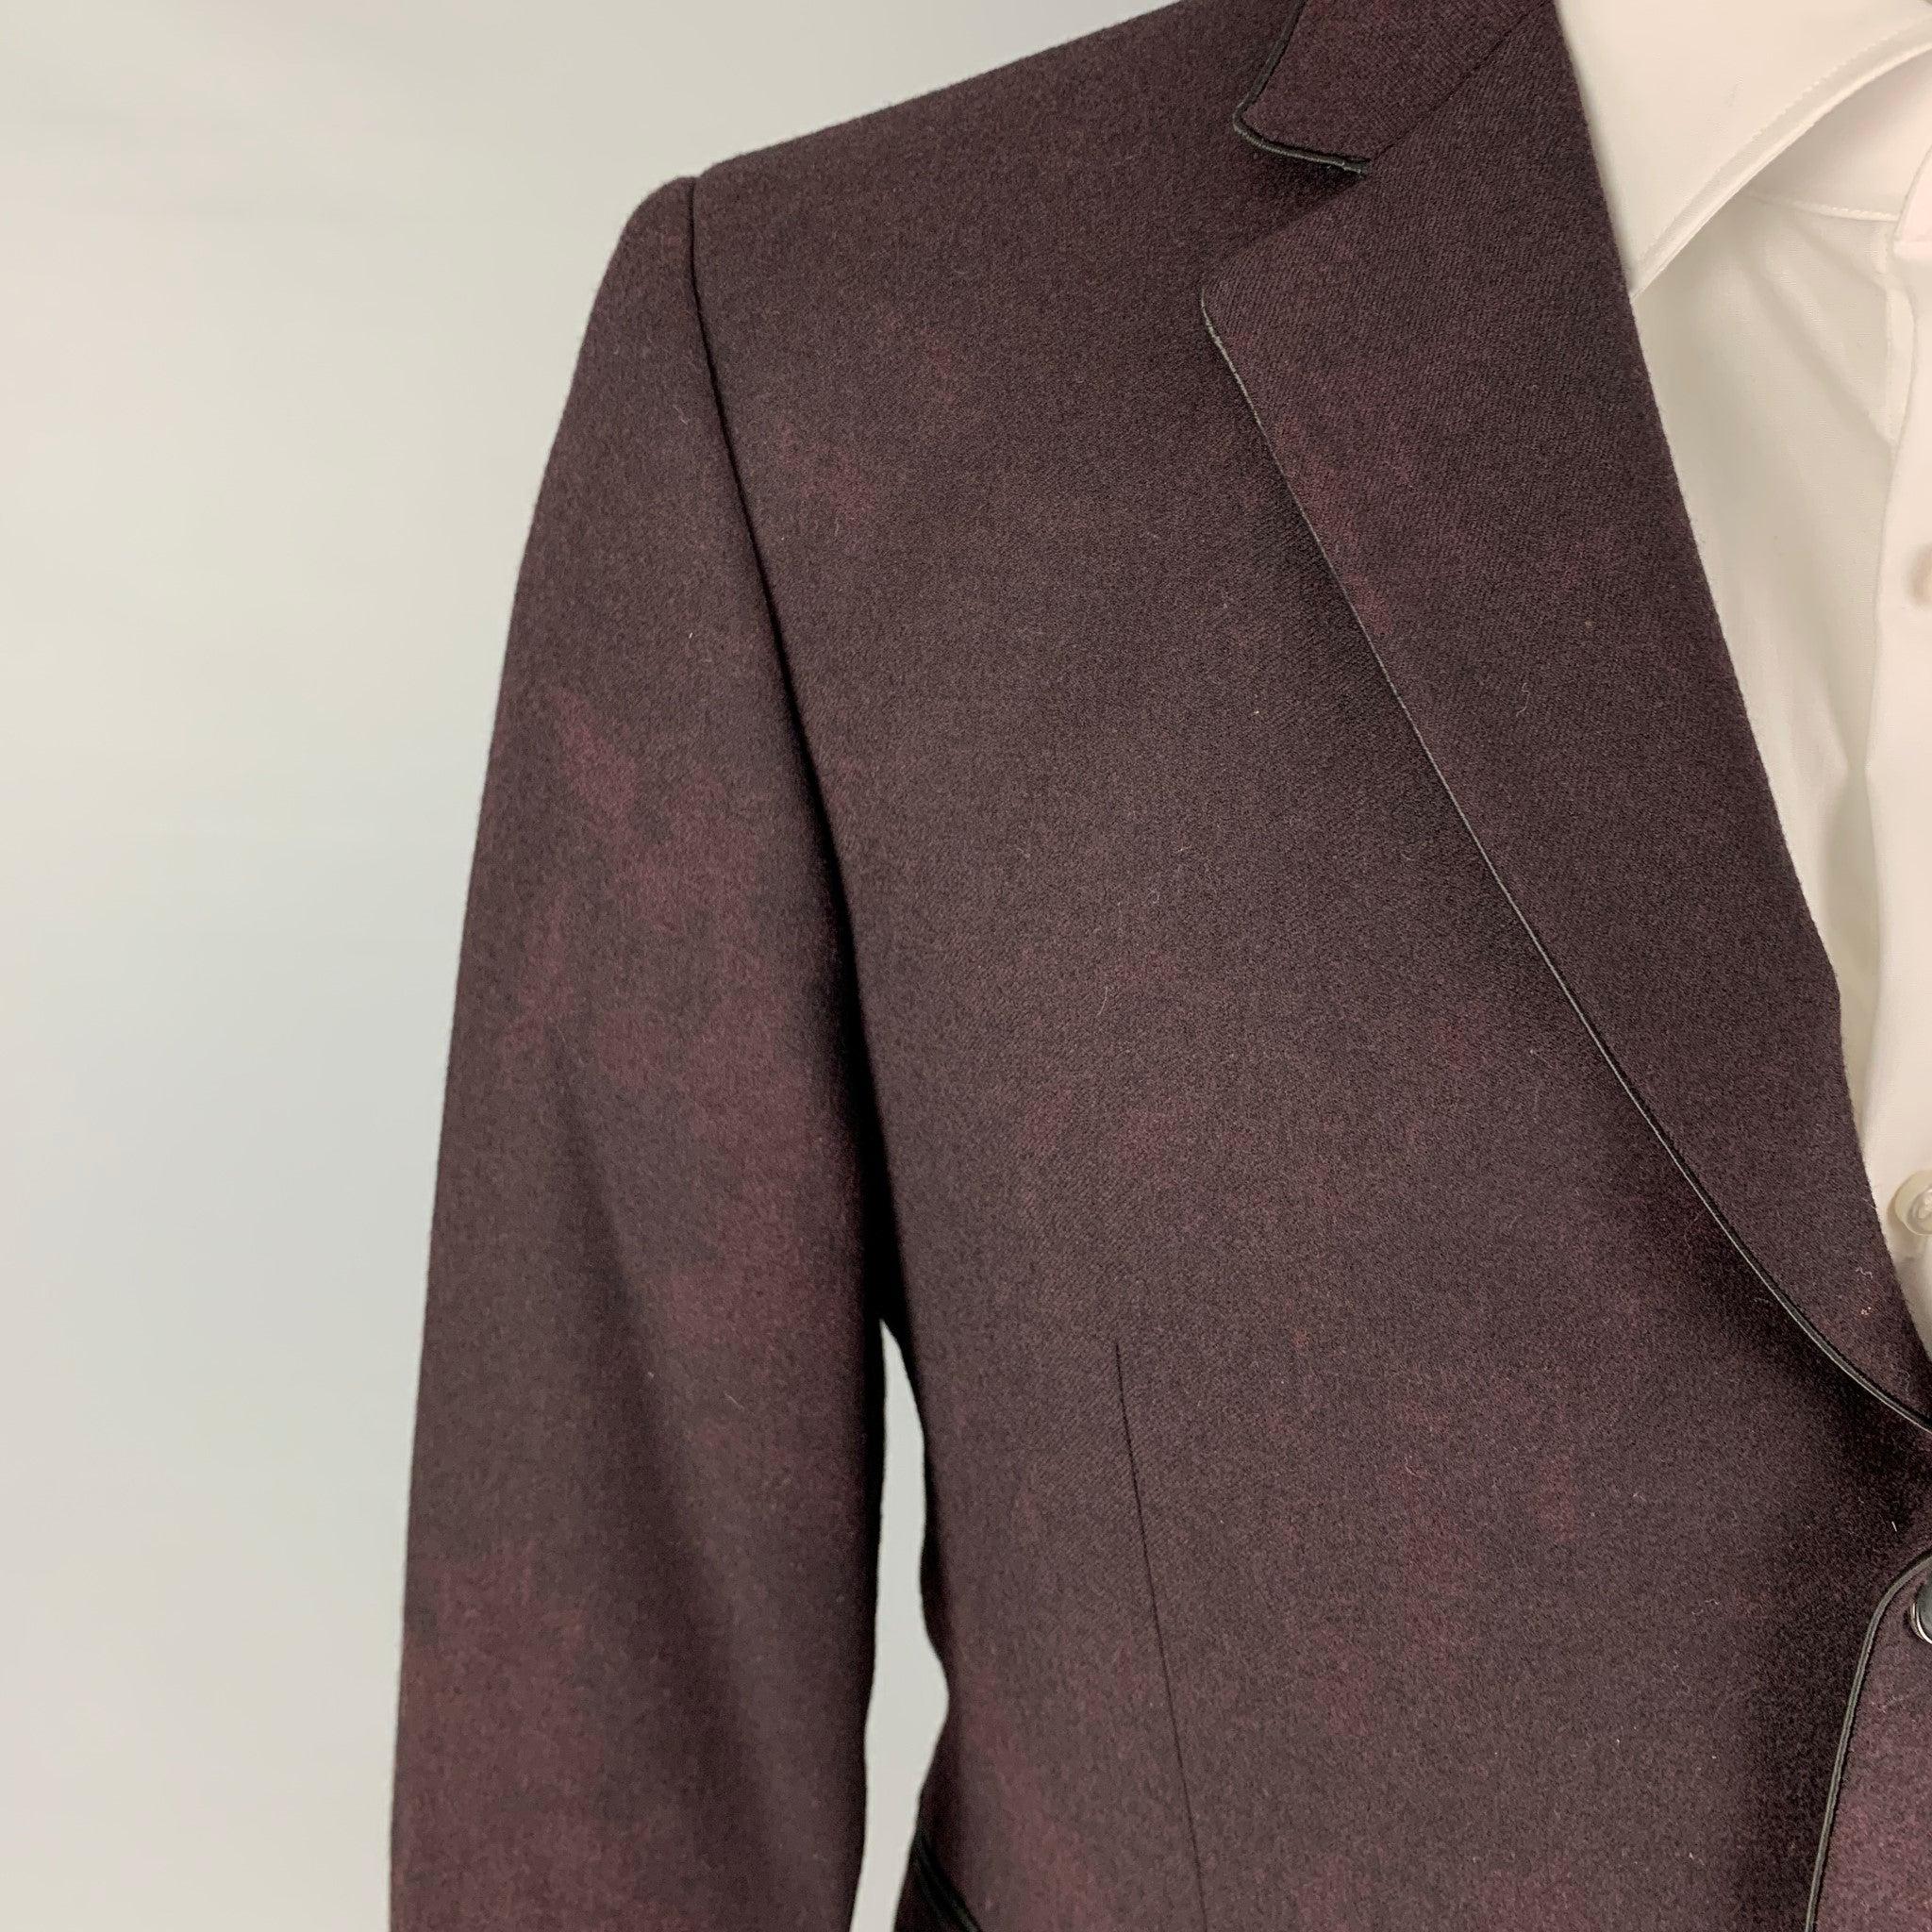 JOHN VARVATOS sport coat comes in a burgundy / black dyed wool with a full liner featuring a notch lapel, slit pockets, double back vent, and a three button closure. Made in Italy.
Very Good
Pre-Owned Condition. 

Marked:   48 

Measurements: 
